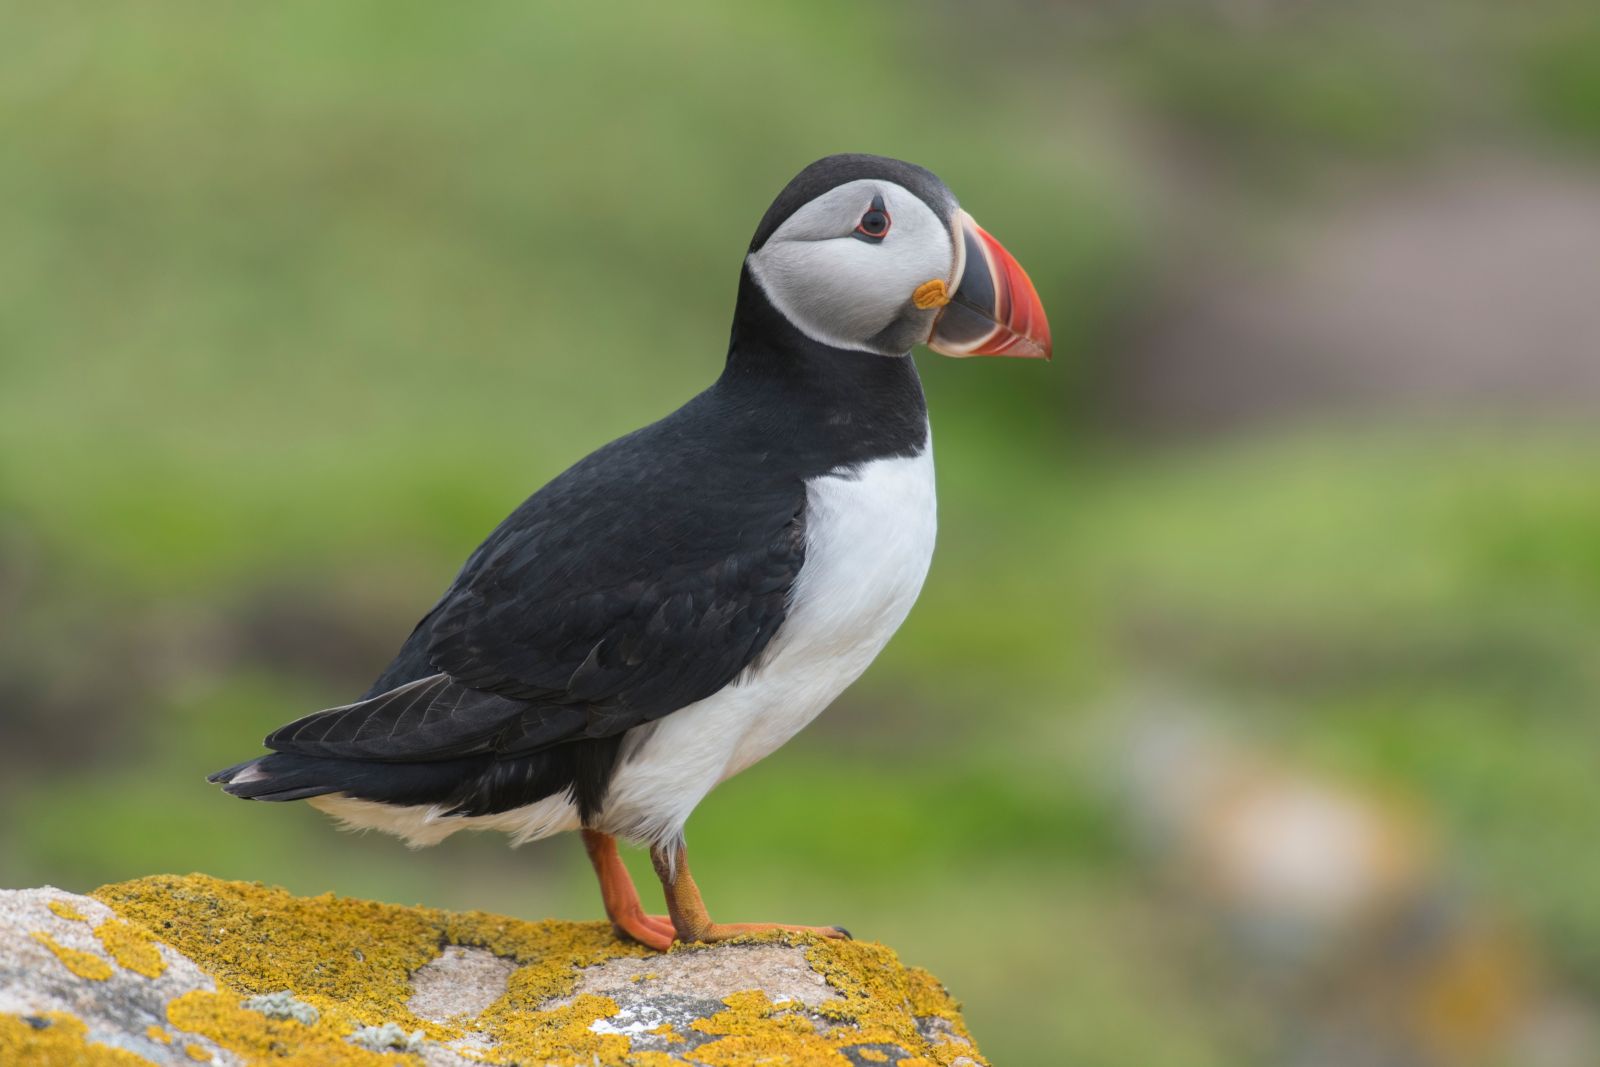 How can we improve the prospects of species such as puffins in our Parks?